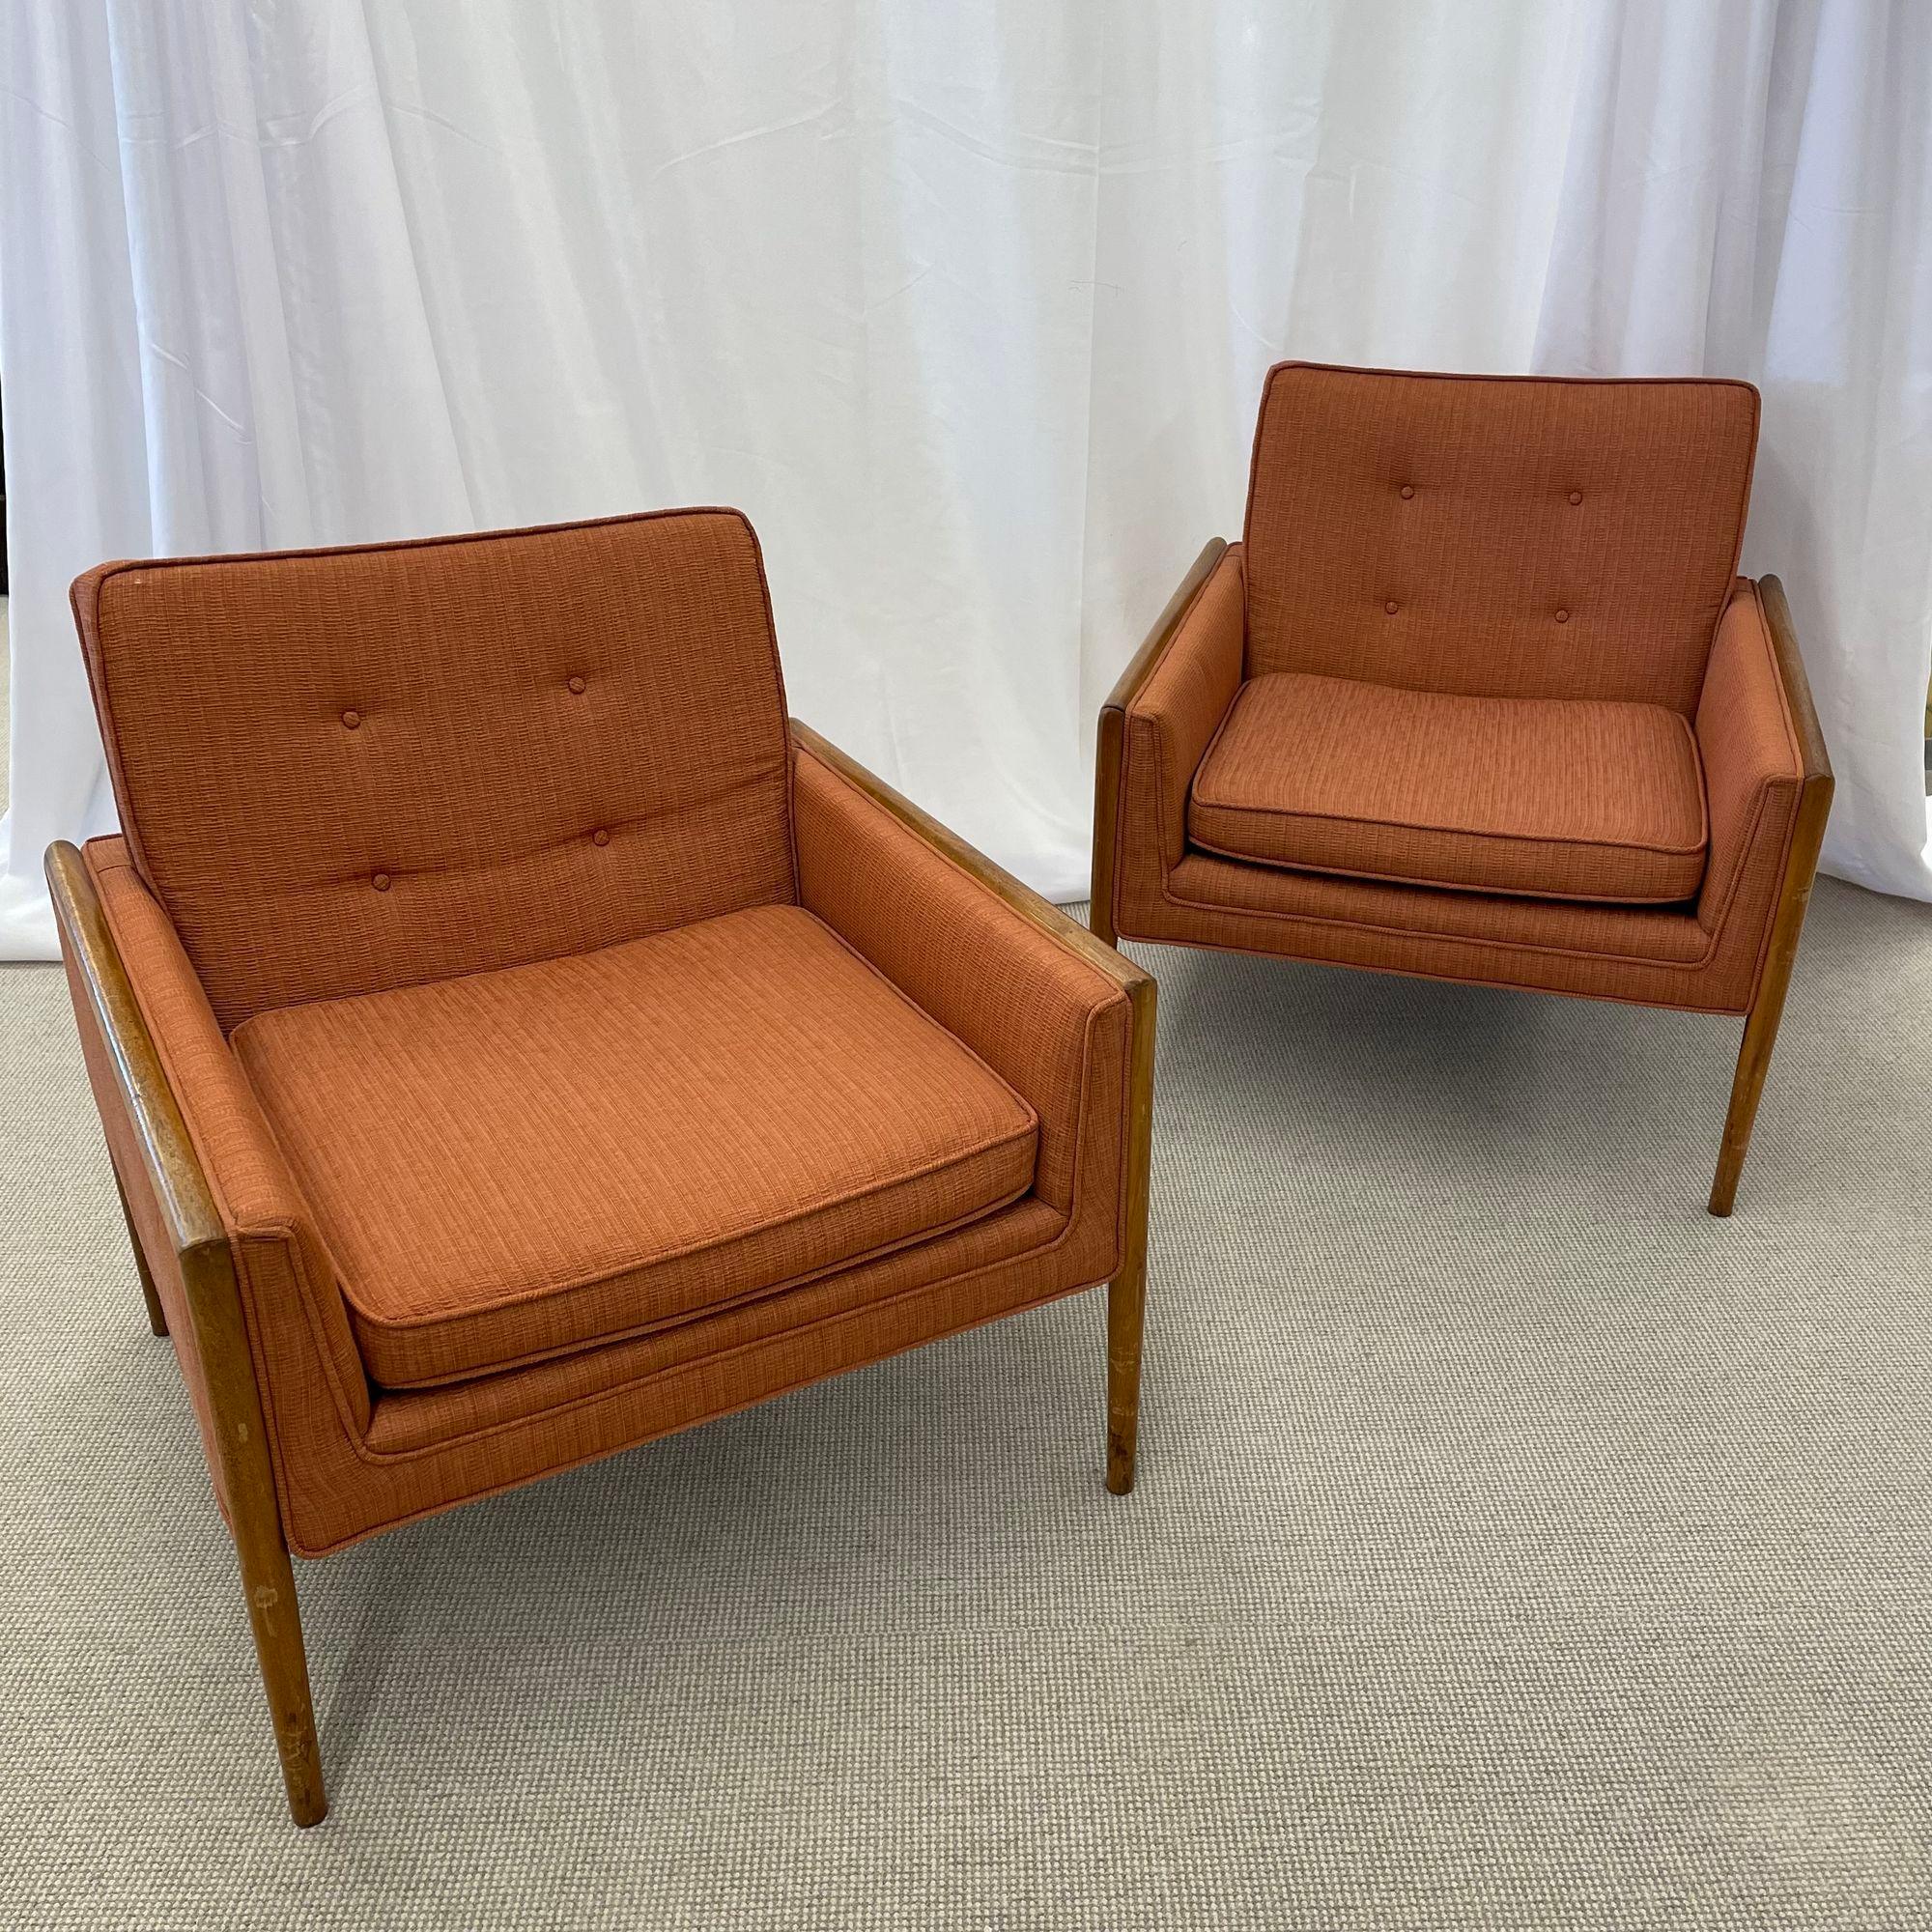 Pair of Mid-Century Modern Lounge Chairs, American, Walnut, 1960s For Sale 14